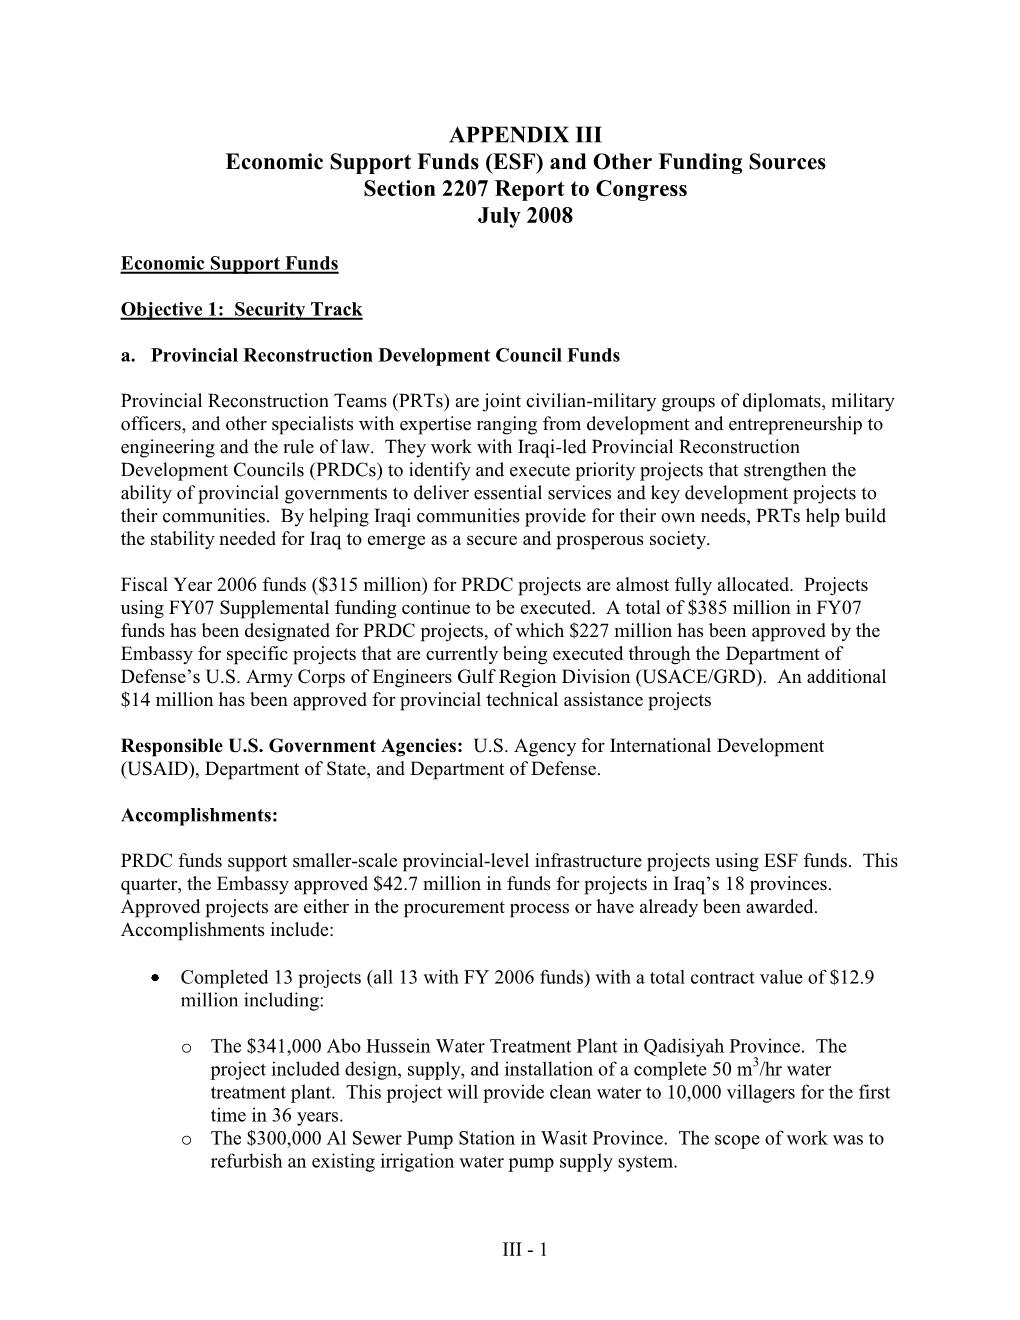 Economic Support Funds (ESF) and Other Funding Sources Section 2207 Report to Congress July 2008